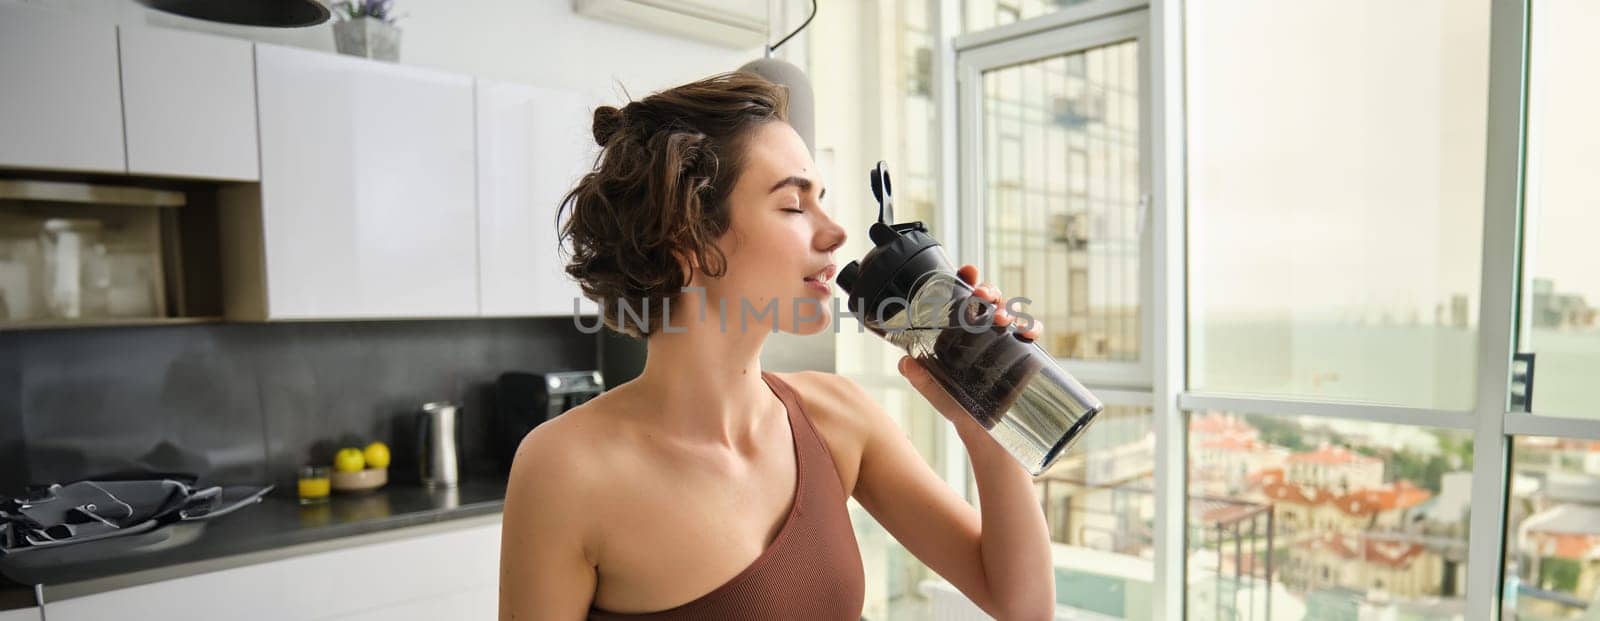 Female athlete in her kitchen, standing with water bottle, drinking after workout yoga training. Sportswear in sports wear stays hydrated after gym exercise.